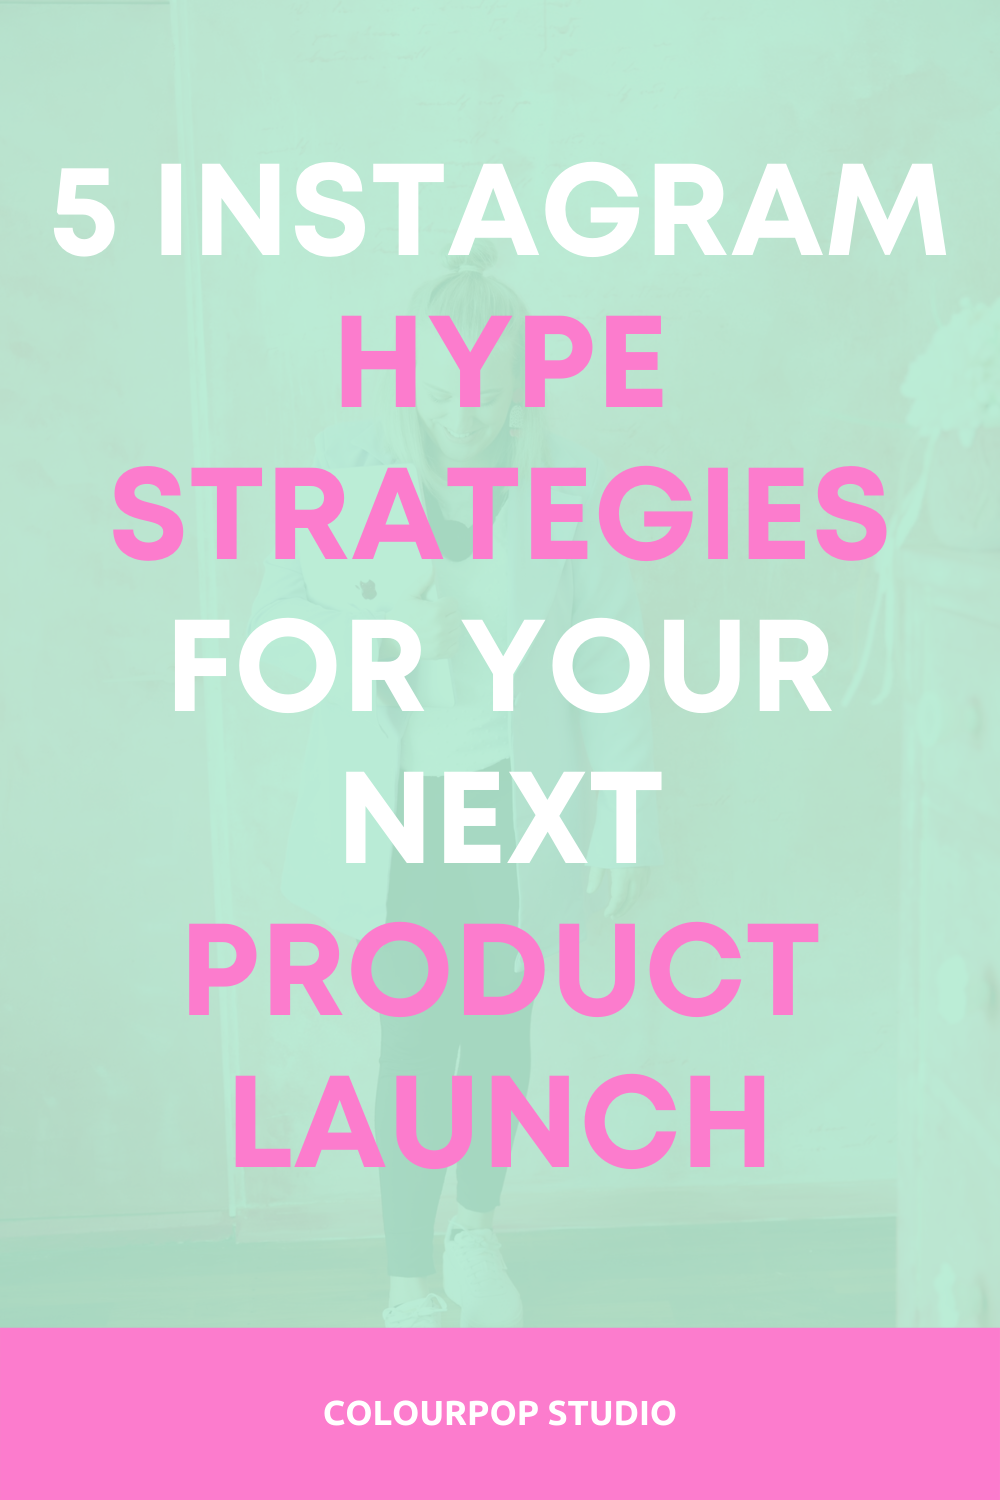 how to create hype on instagram for your next product launch